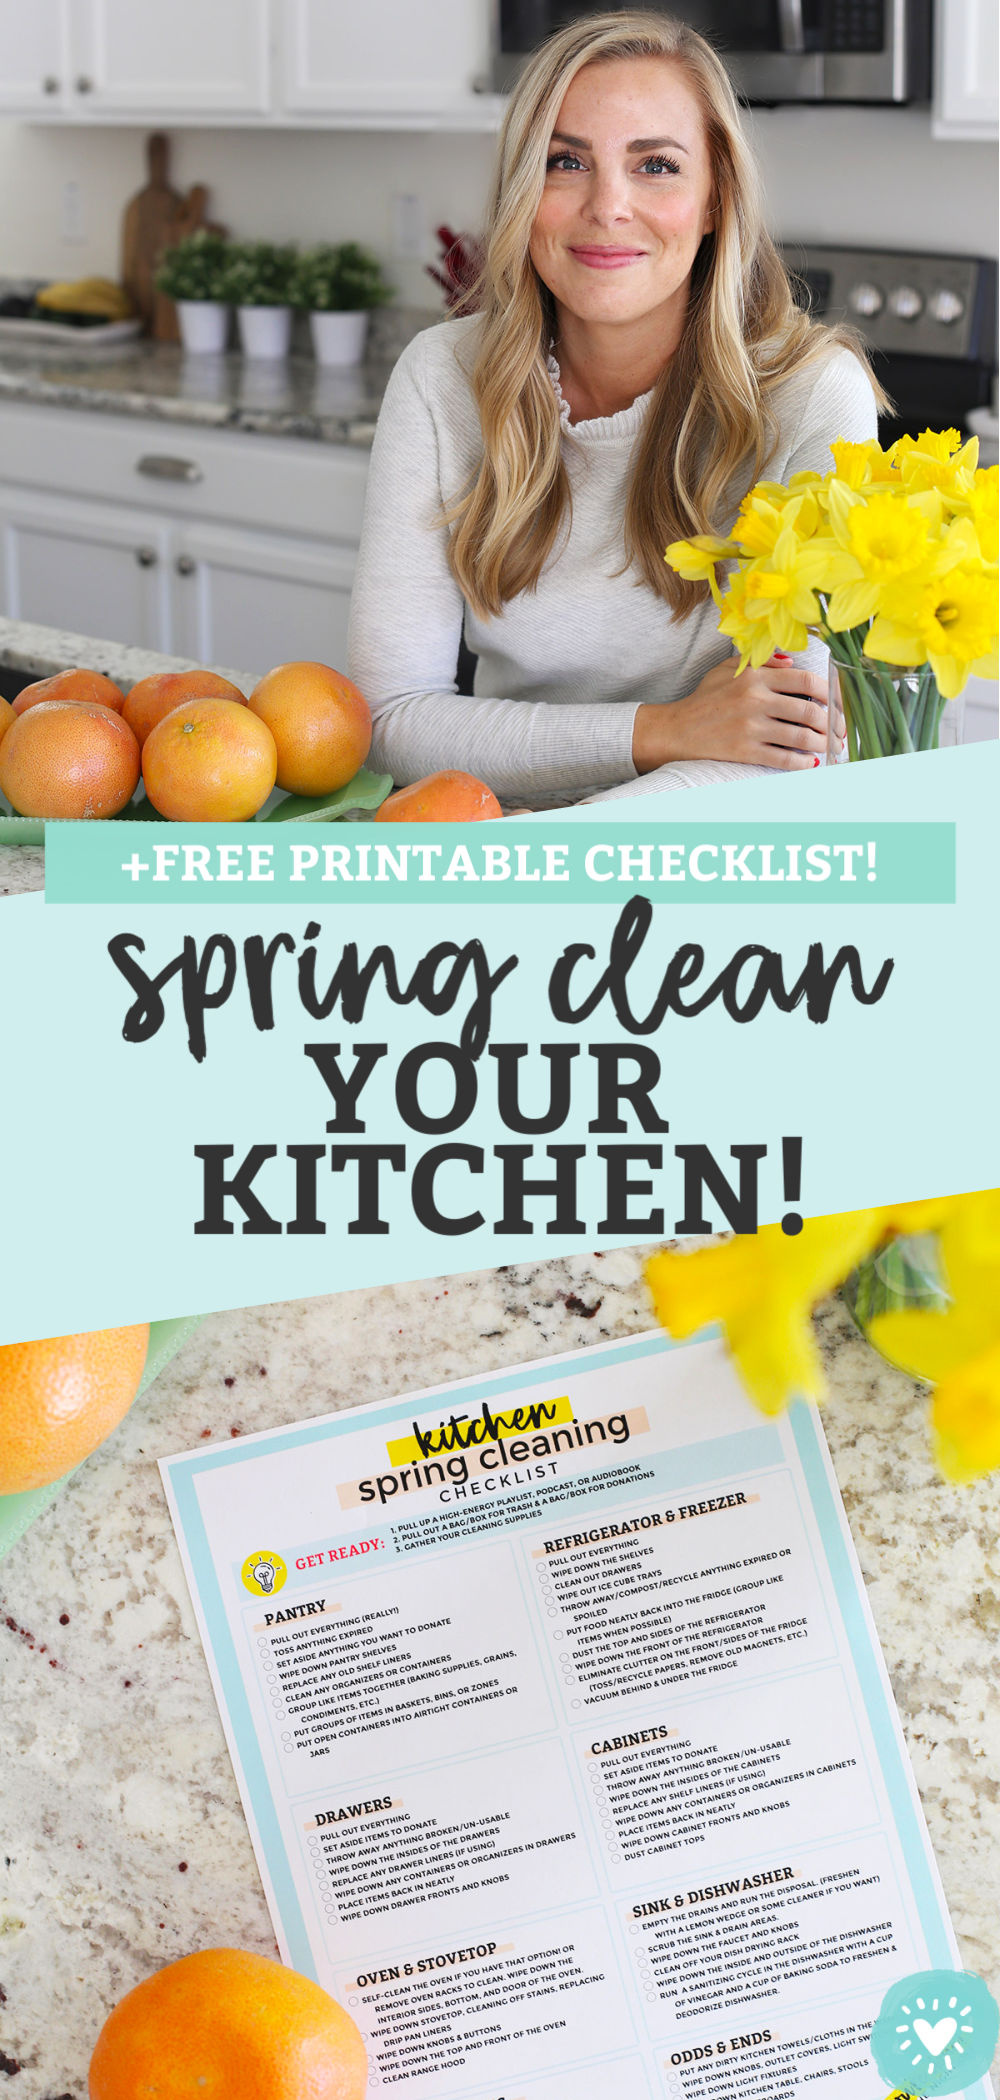 How to Deep-Clean Your Kitchen. A step-by-step checklist to clean your kitchen! Perfect for spring cleaning! // Kitchen Cleaning Tips // Spring Cleaning // Kitchen Cleaning Checklist #cleaningtips #springcleaning #kitchen #kitchentips #freeprintable